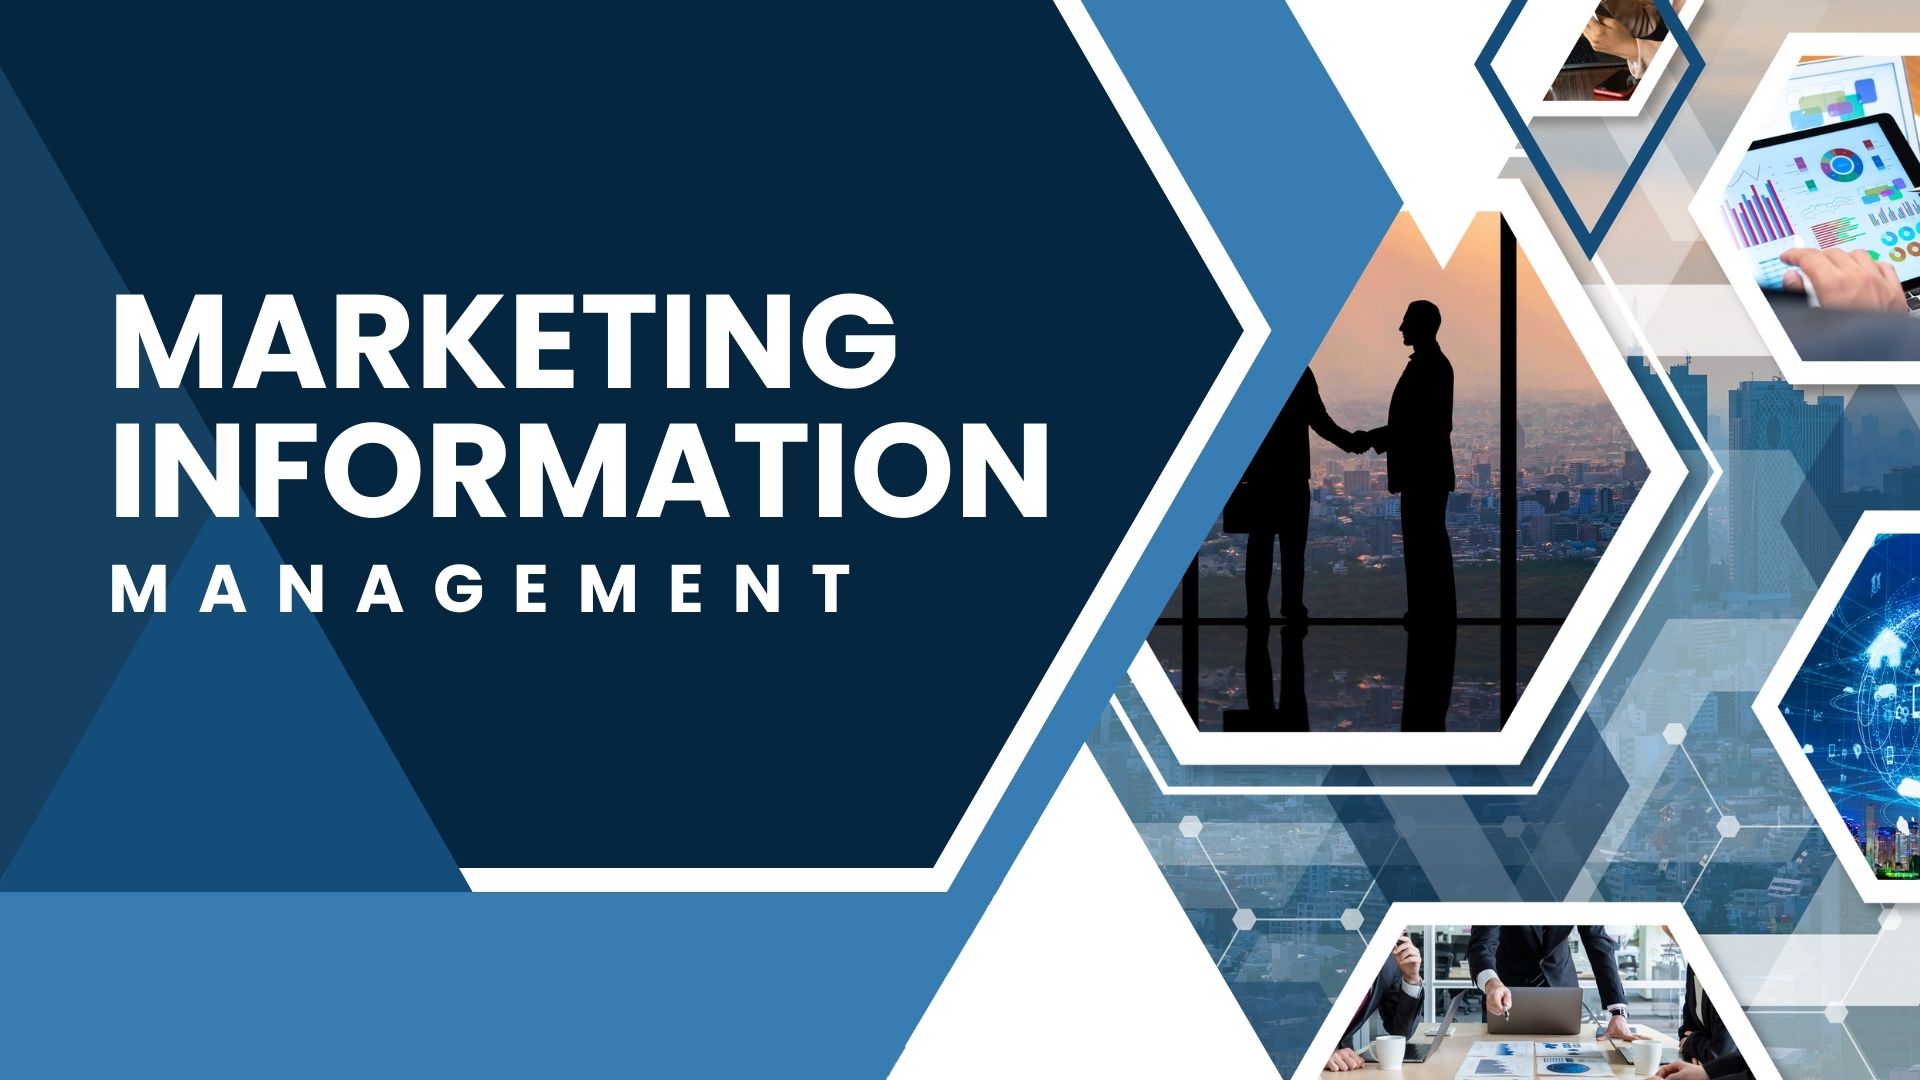 Driving Growth and Efficiency with Marketing Information Management